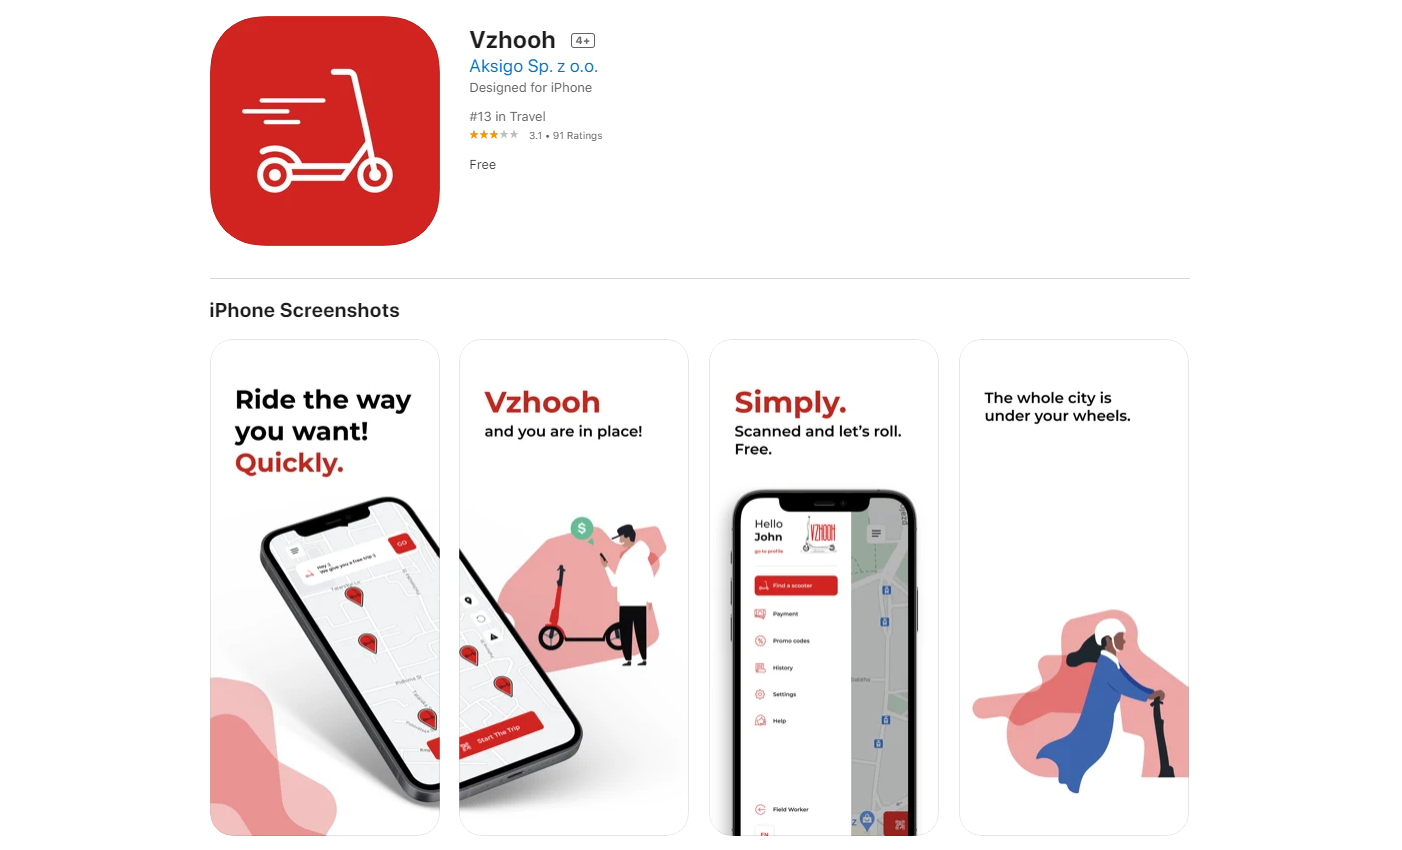 Quazom has published the Vzhooh app in the AppStore.